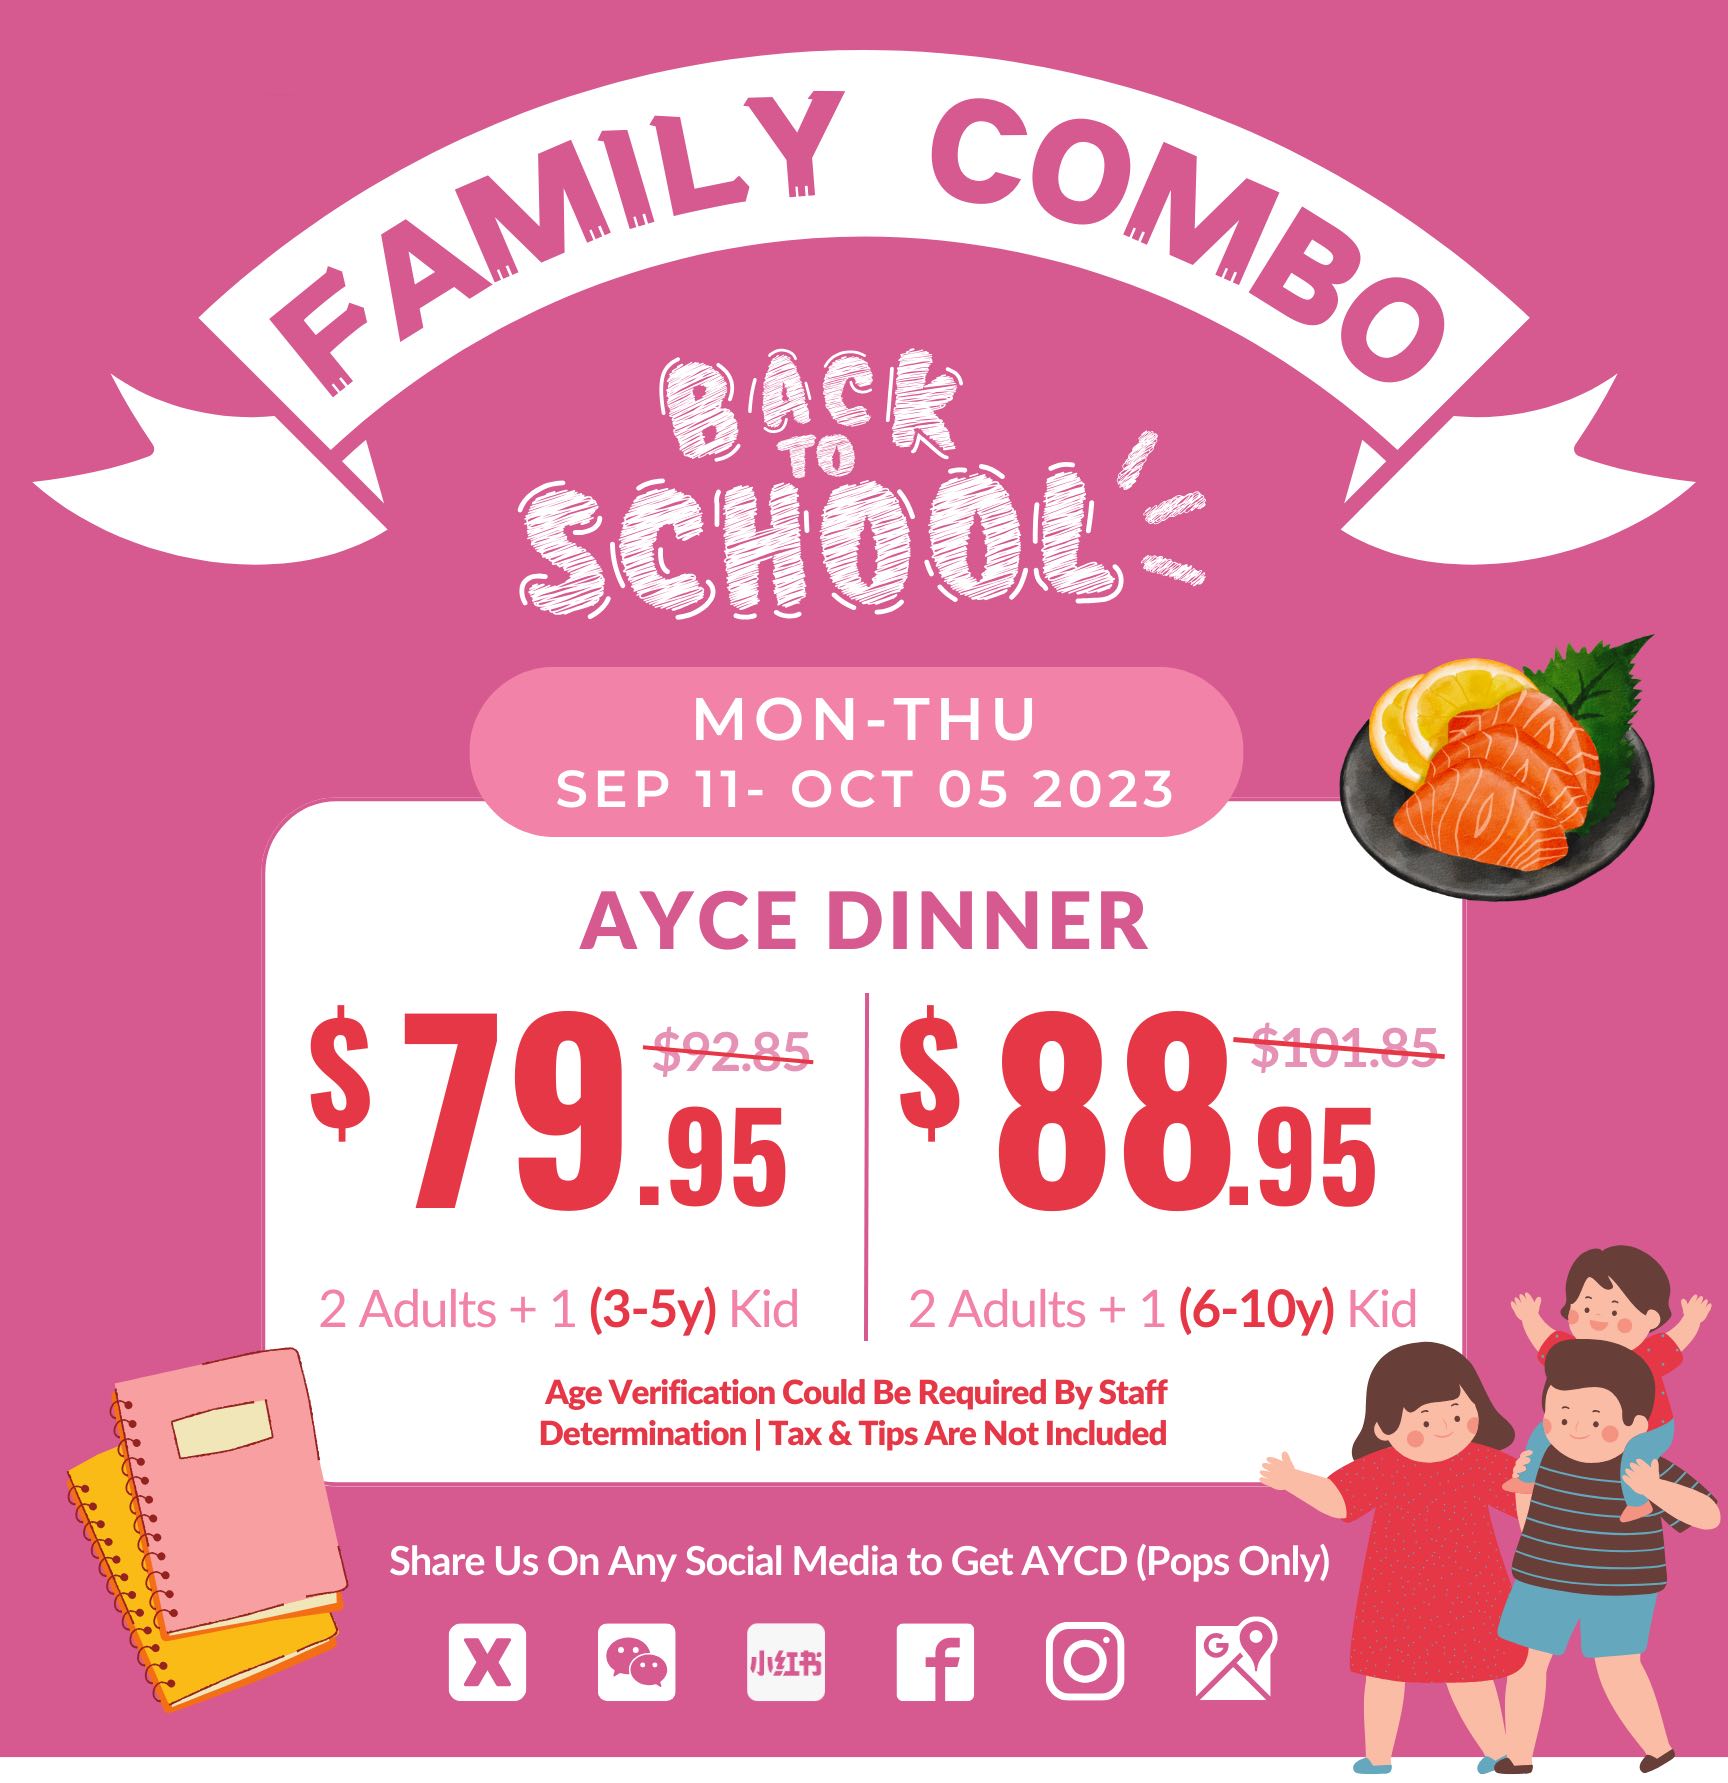 Family combo. Back to school promotion